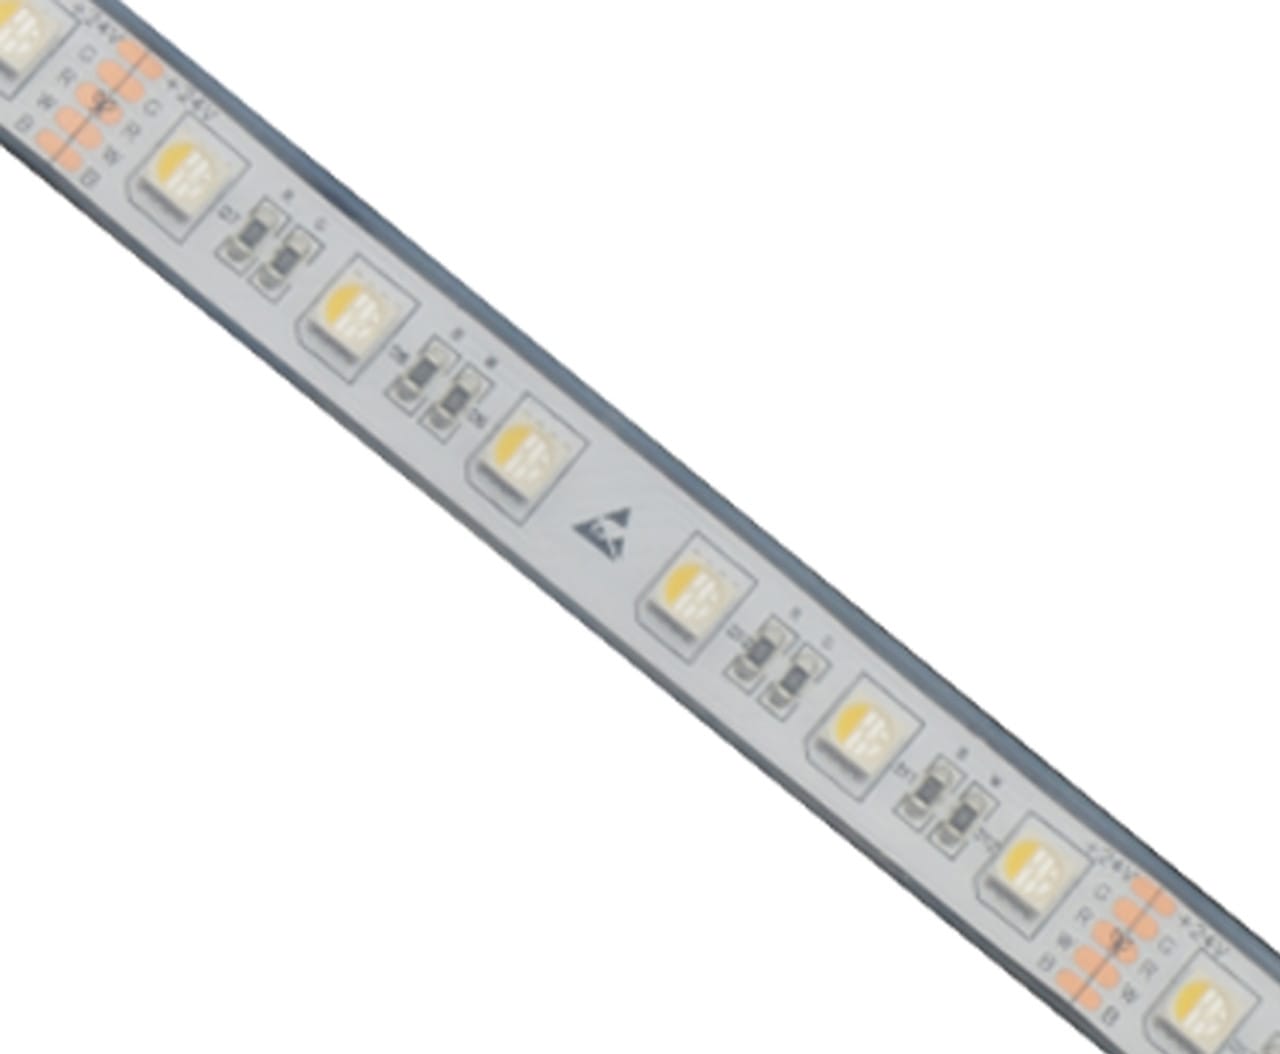 RGBW IP-67 Waterproof LED Strip Lighting for Outdoor Use 24V Ultra Bright  RGBW